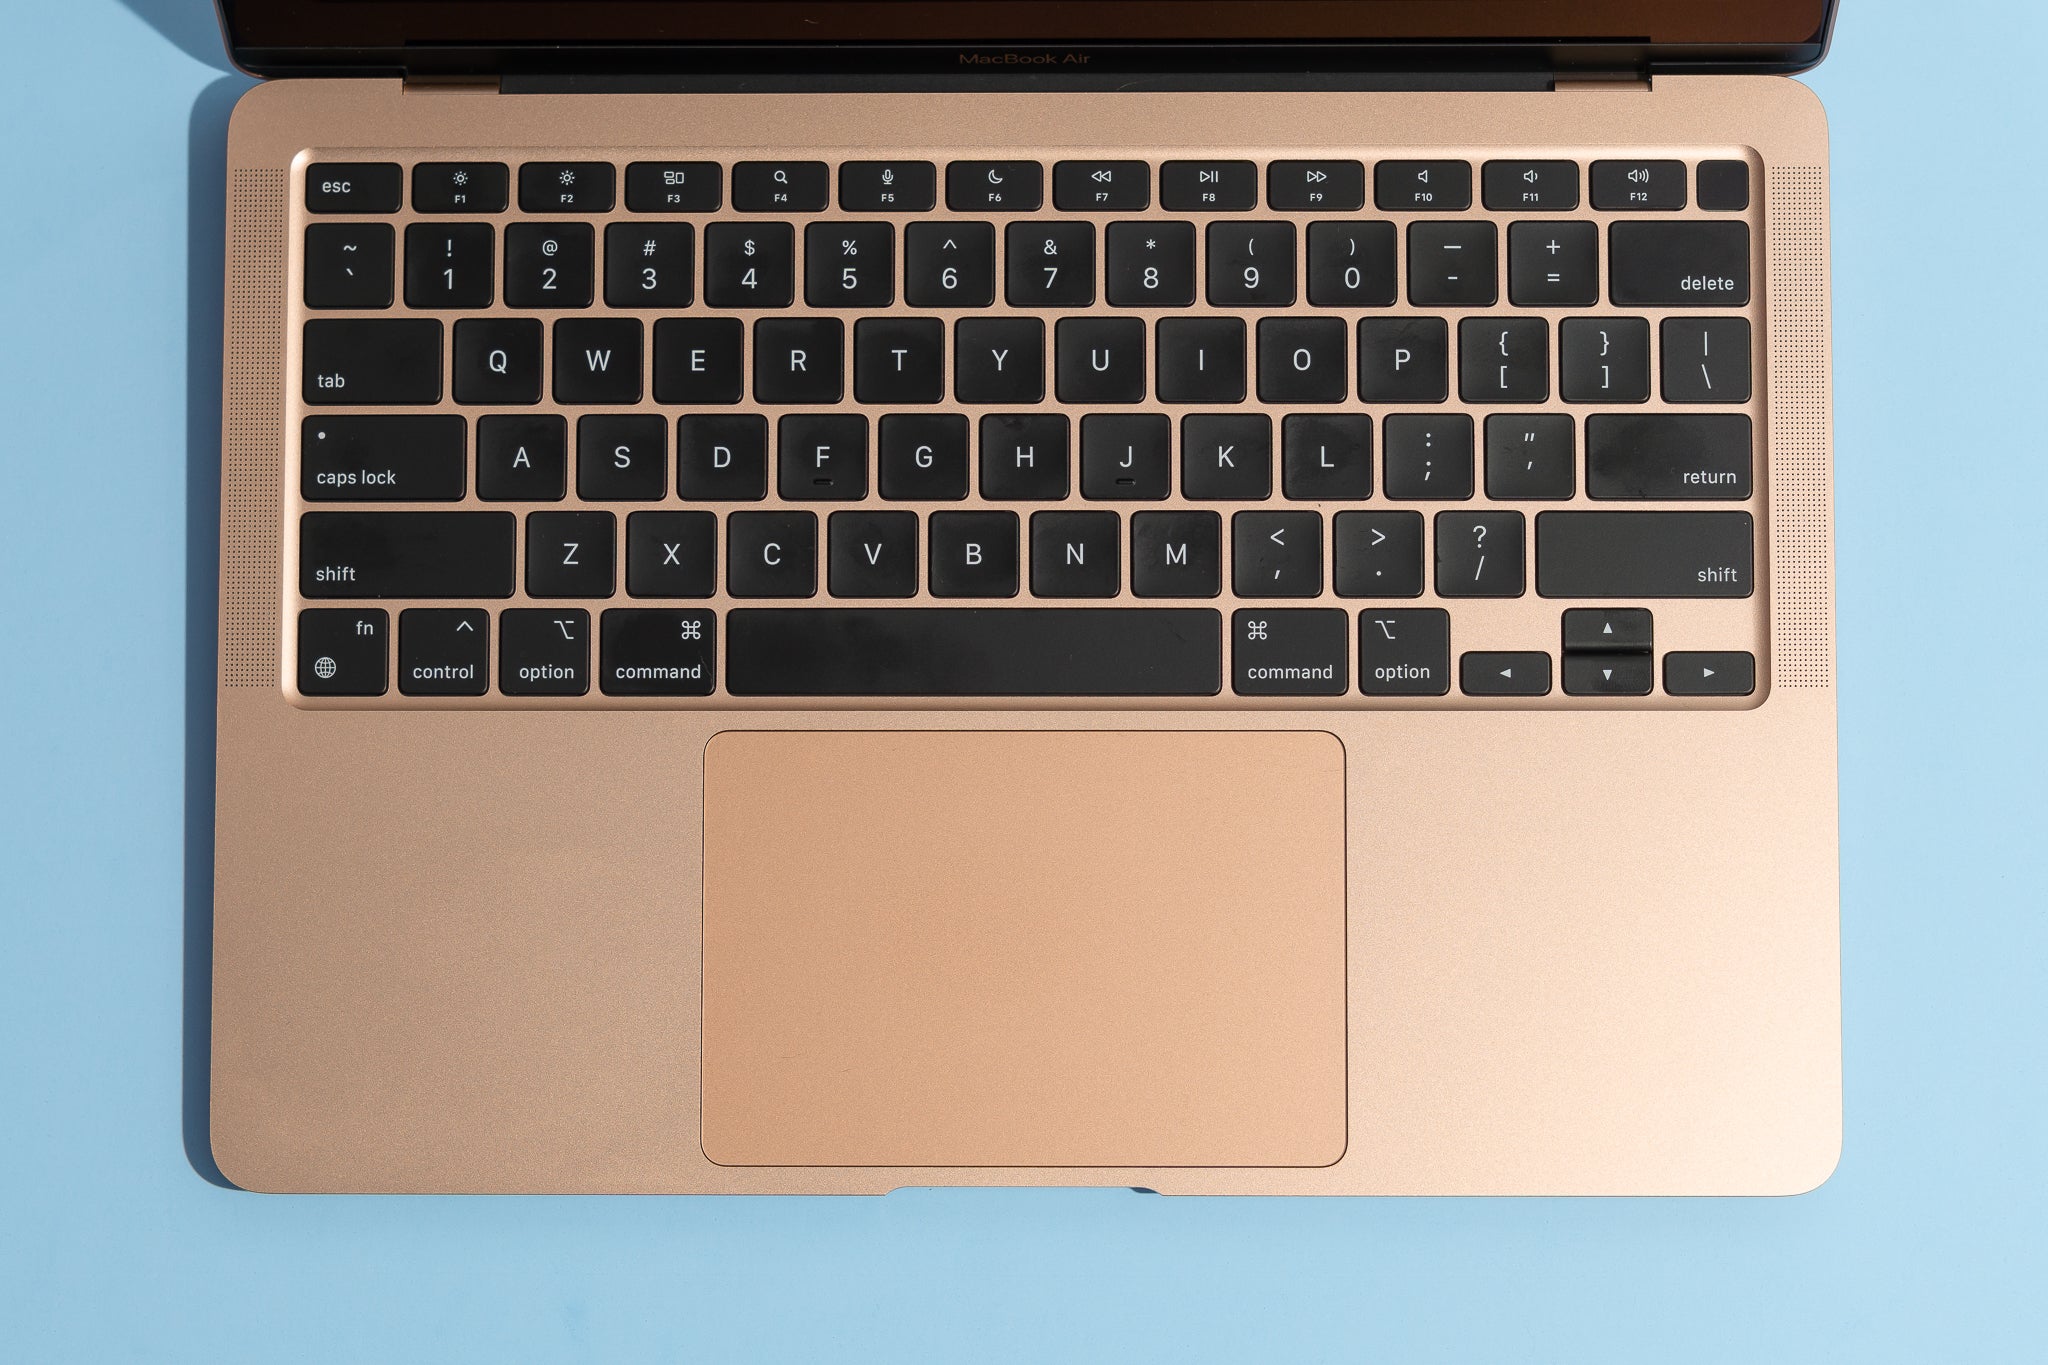 2018 best macbook to get for first time mac user